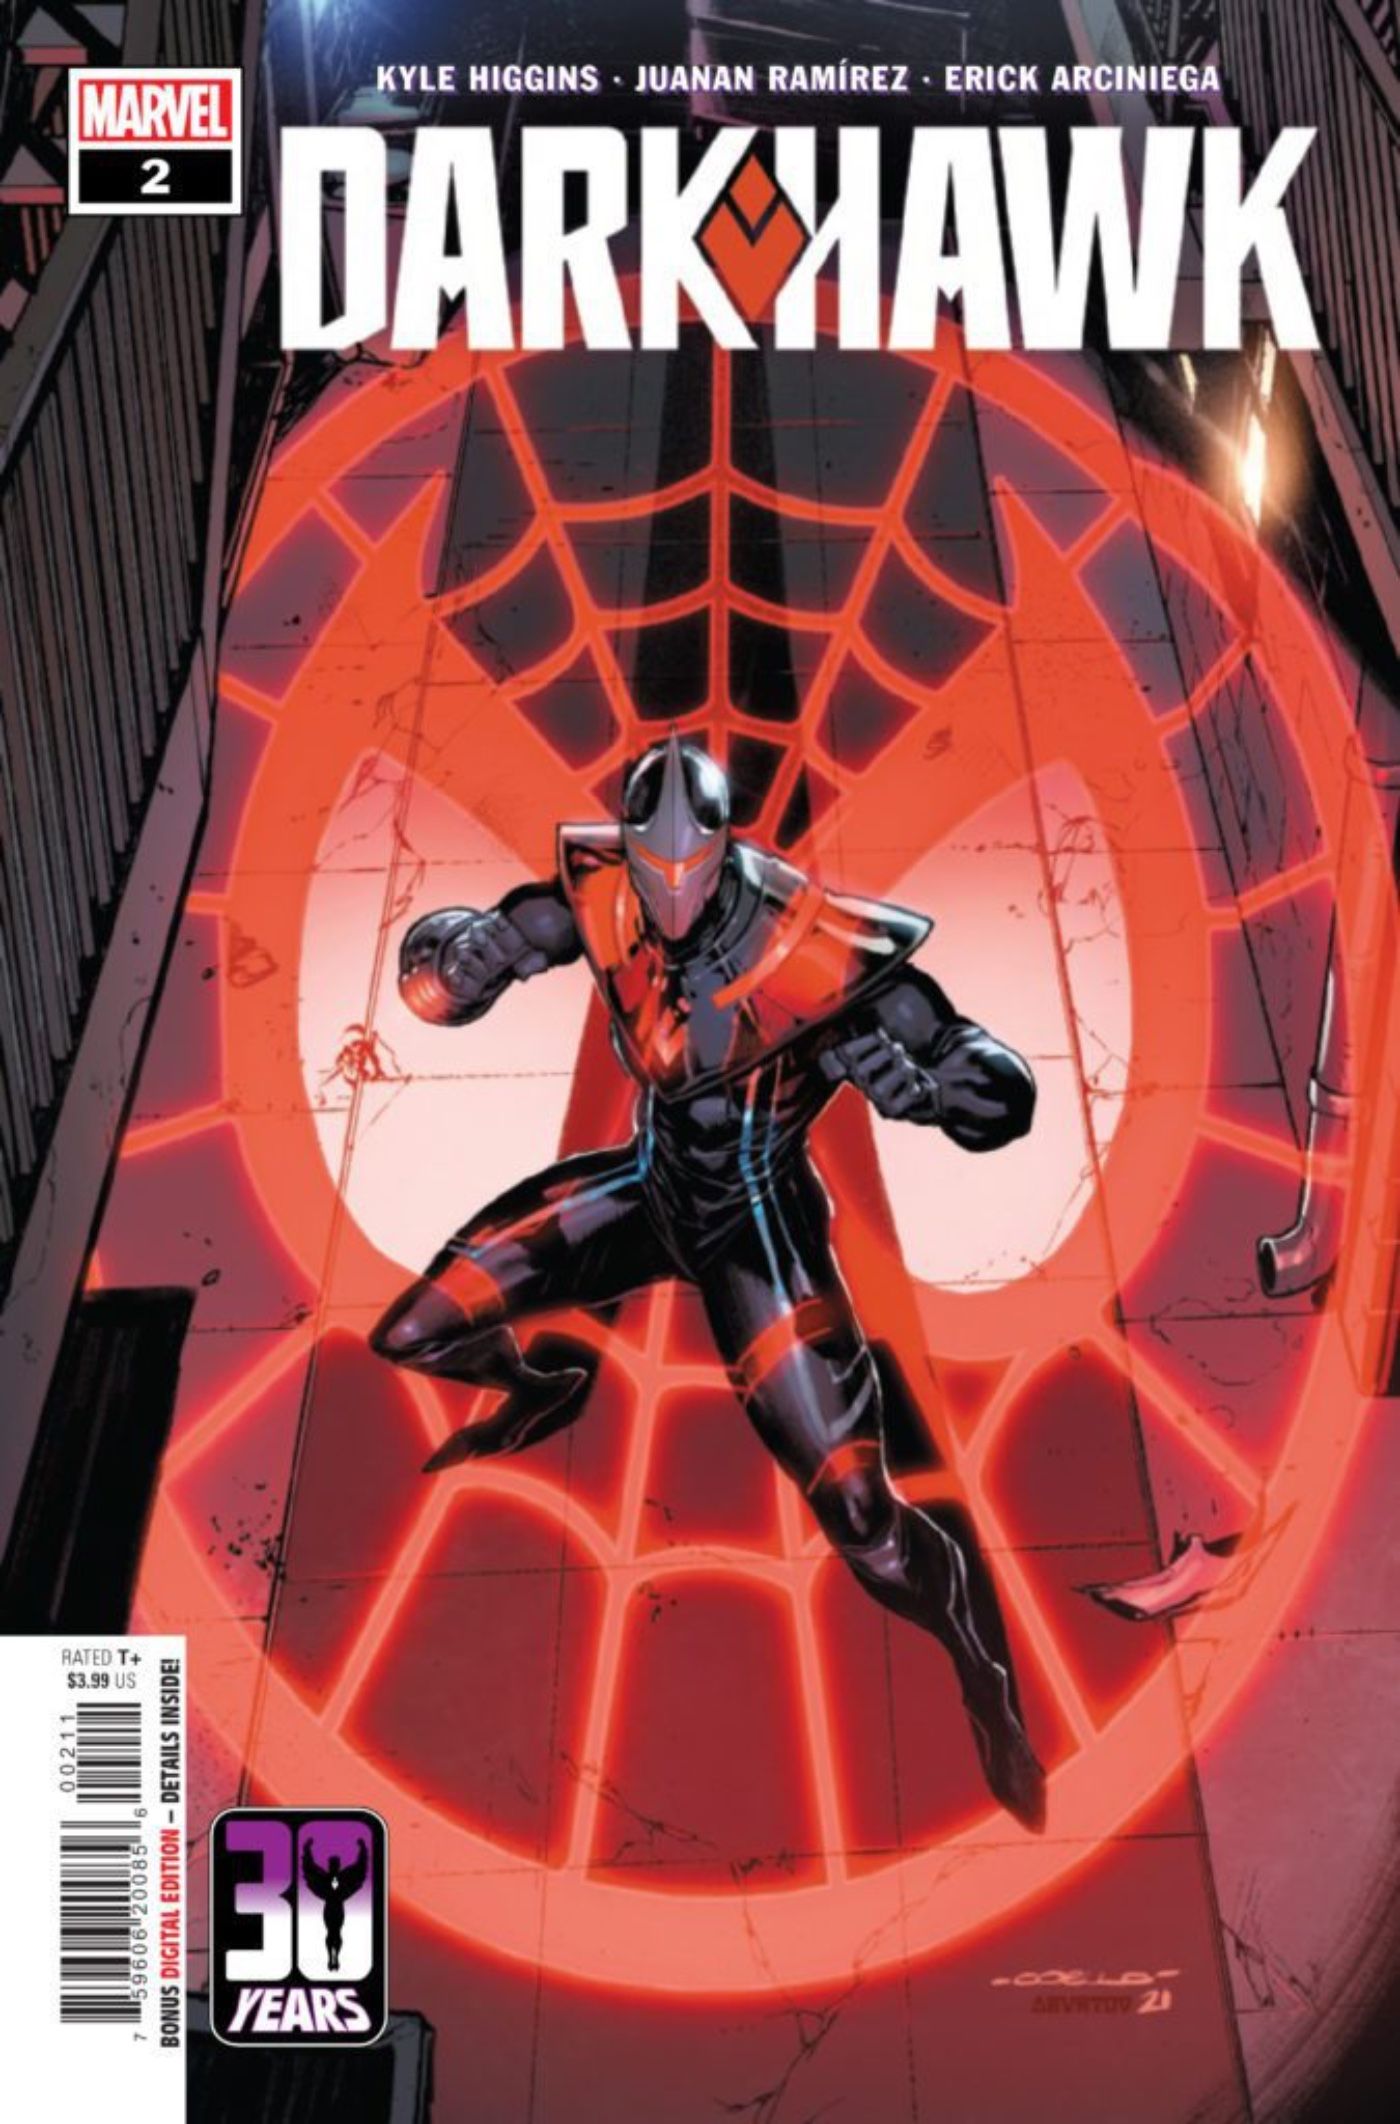 Darkhawk 2 Cover, featuring Darkhawk looking up at a Spidey Signal